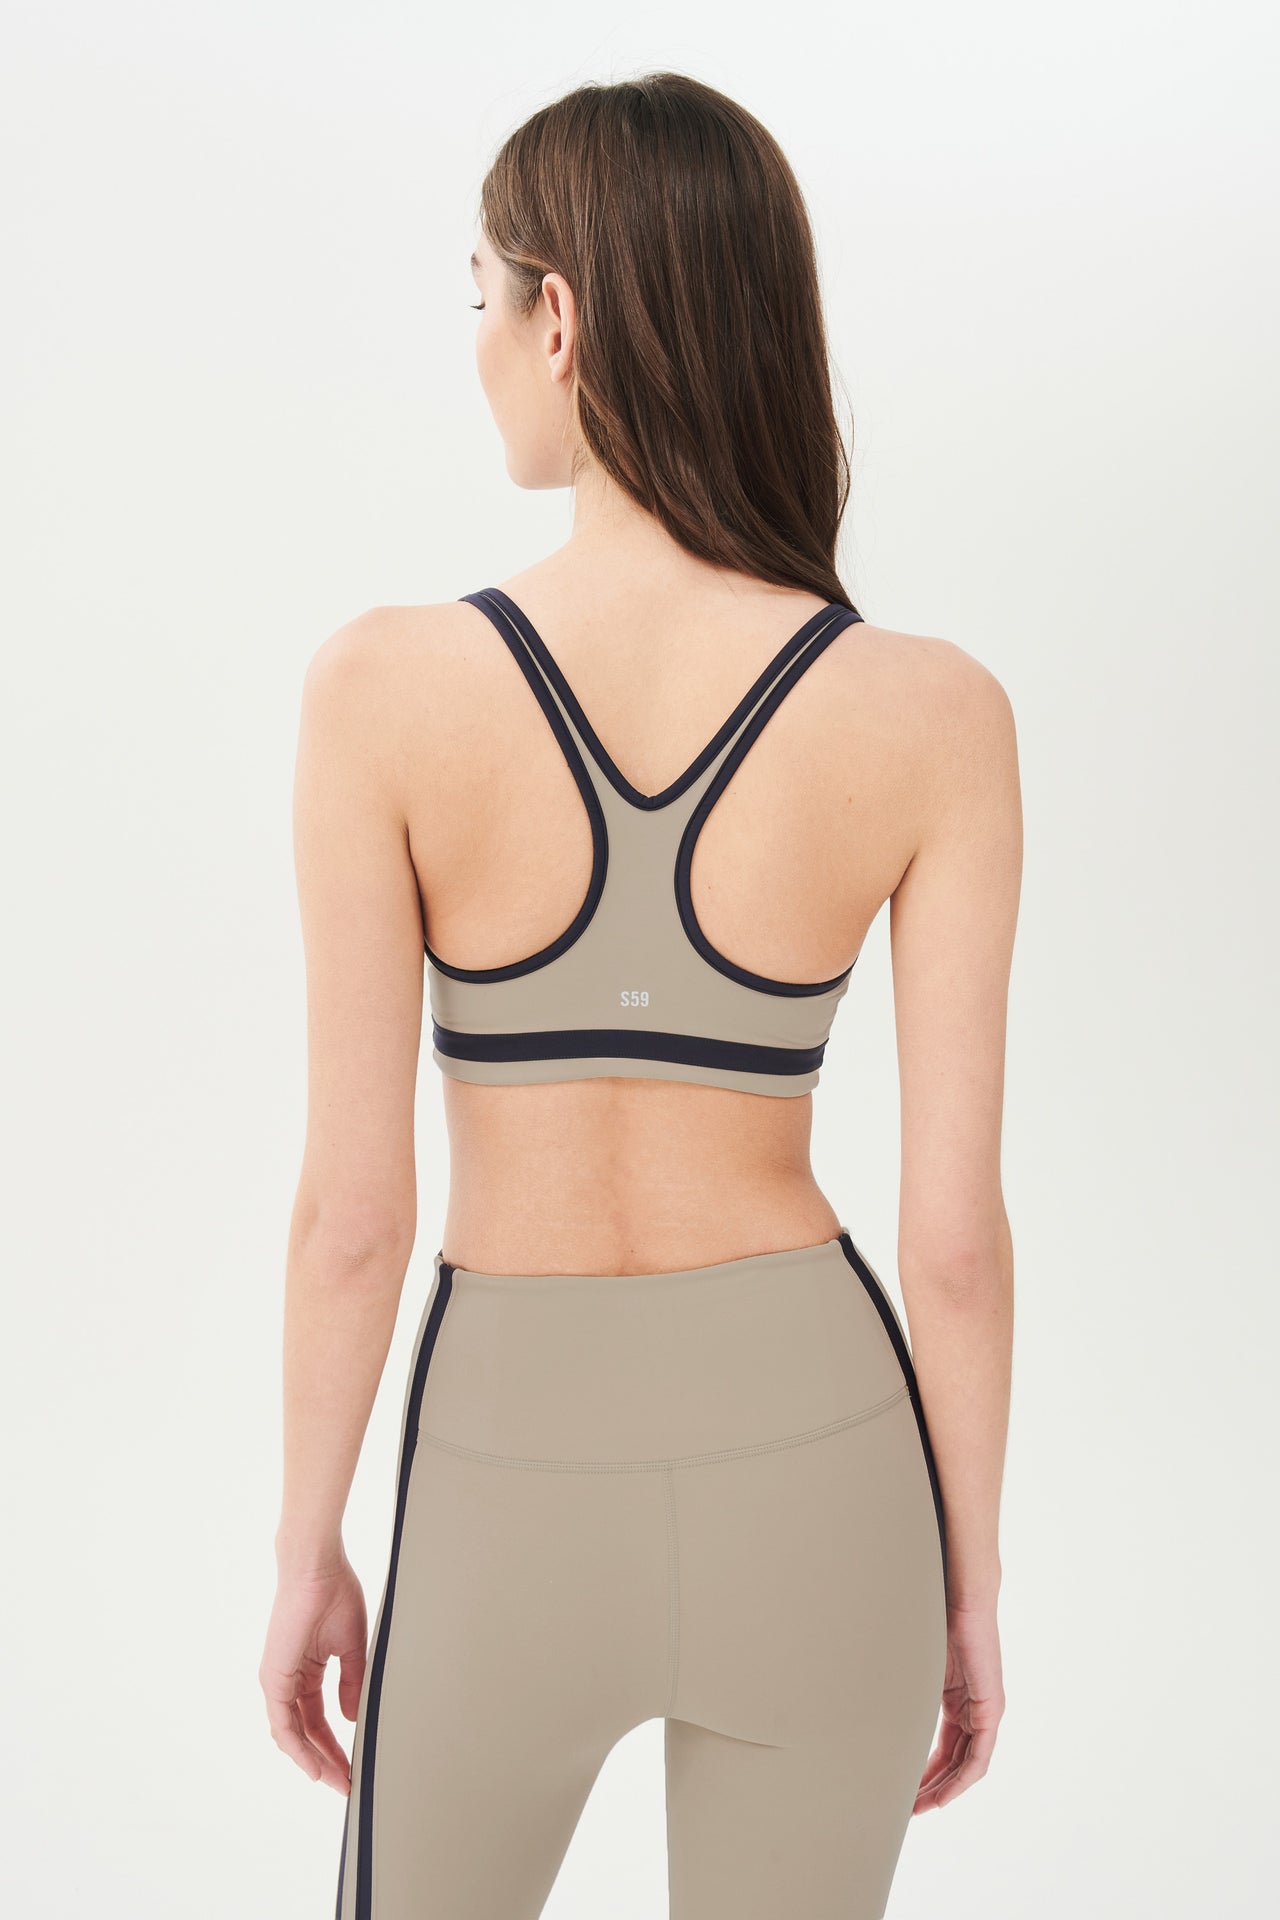 Back view of girl wearing dark light brown sports bra with black colored stripe along the ribs and black hem around the arms and neck with dark light brown leggings with two black stripes down the side 